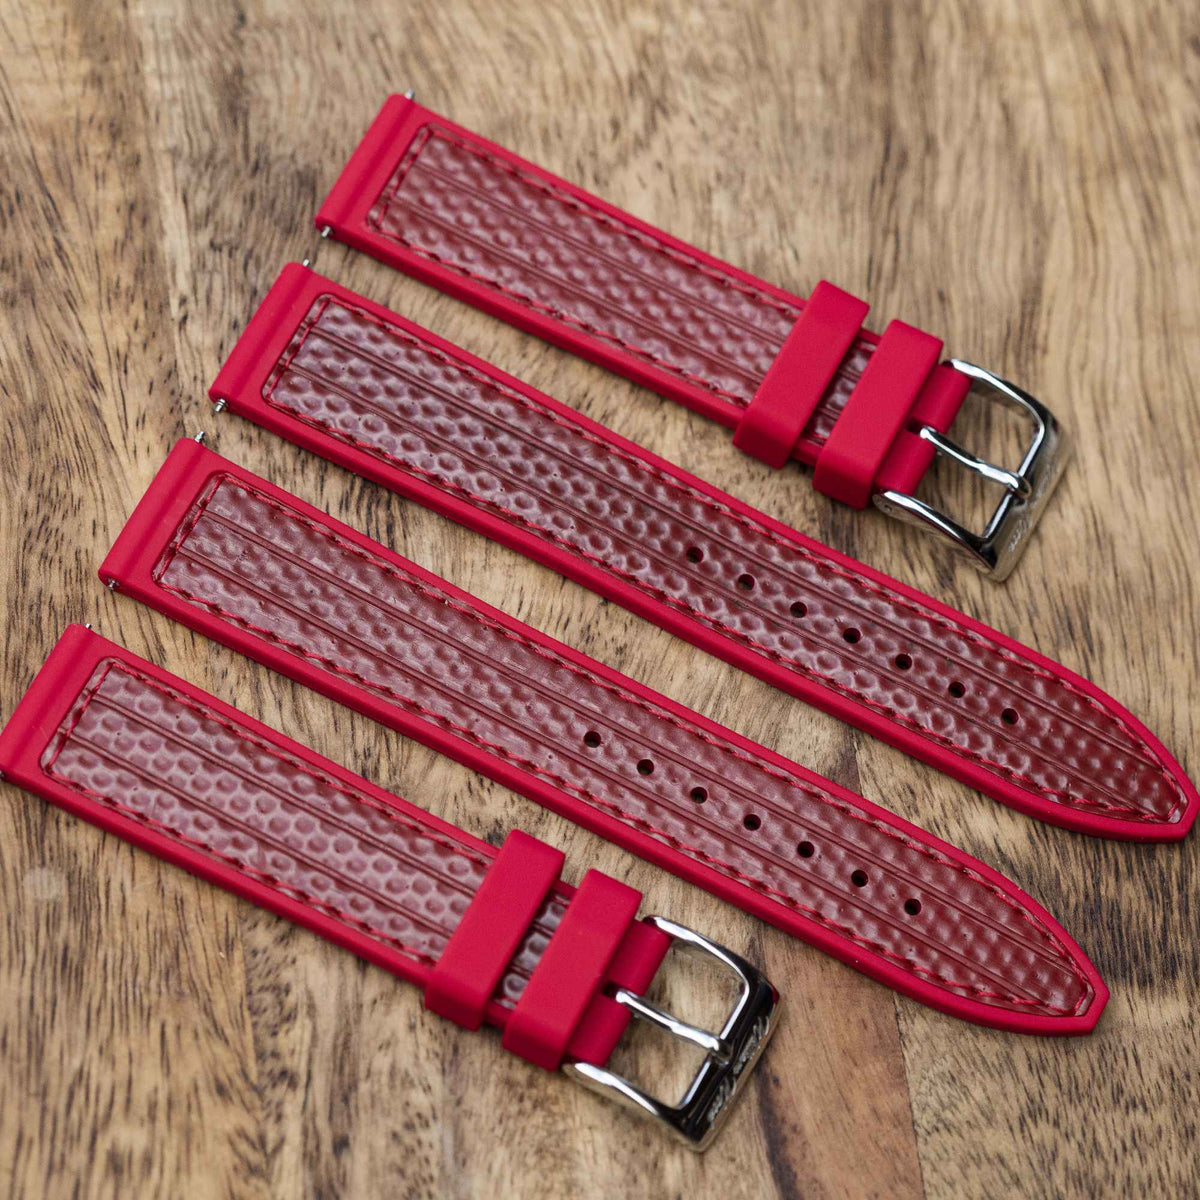 The Valiant Collection - Fire Hose Strap